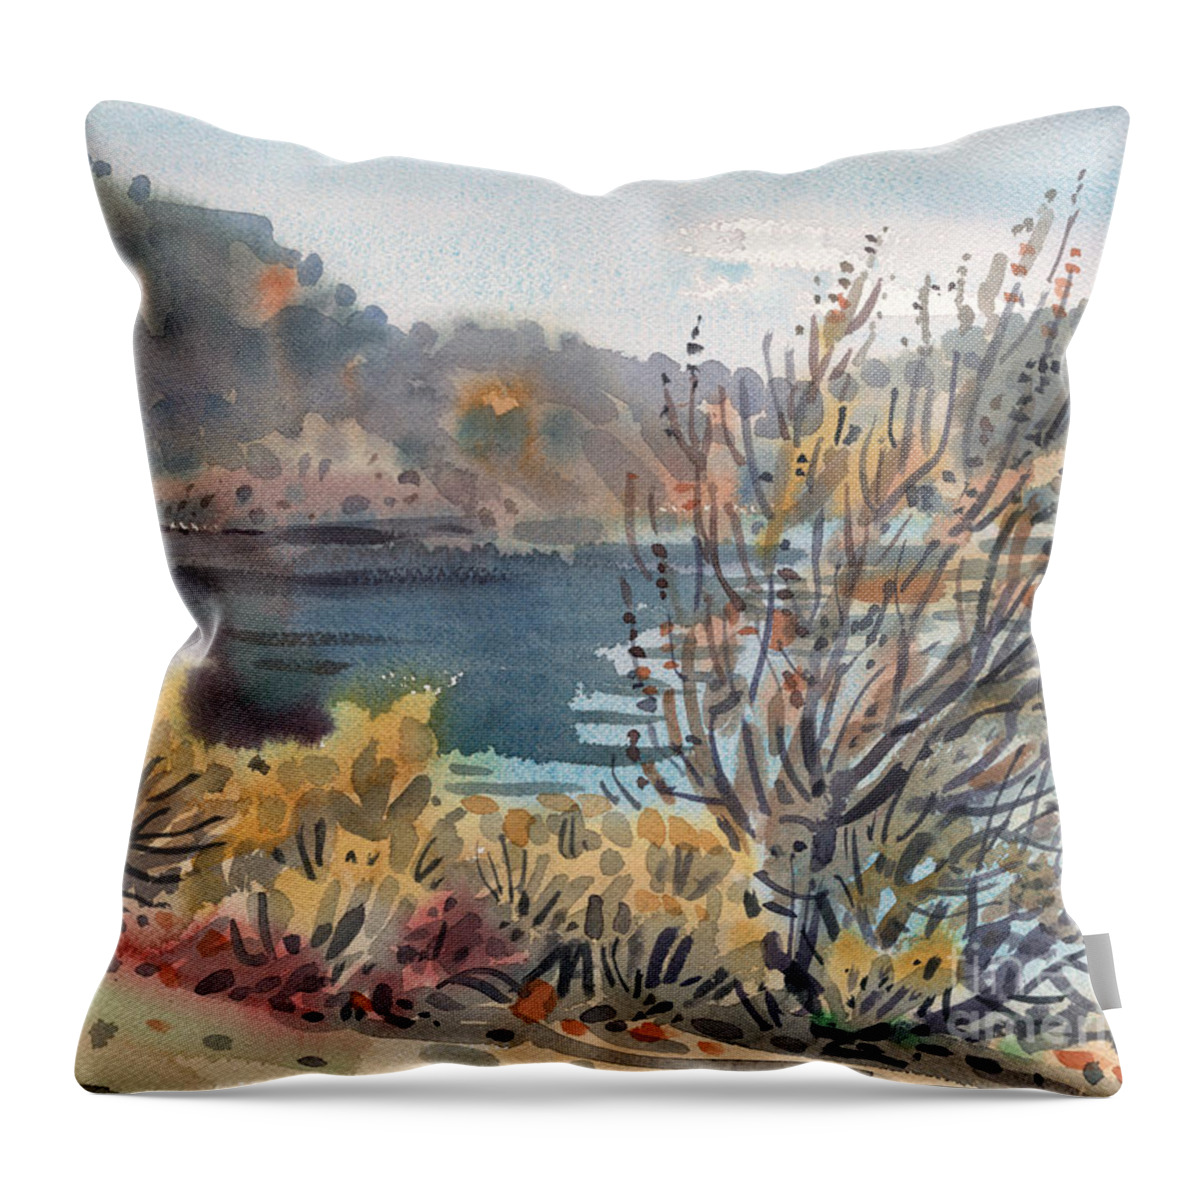 Lake Roosevelt Throw Pillow featuring the painting Lake Roosevelt by Donald Maier